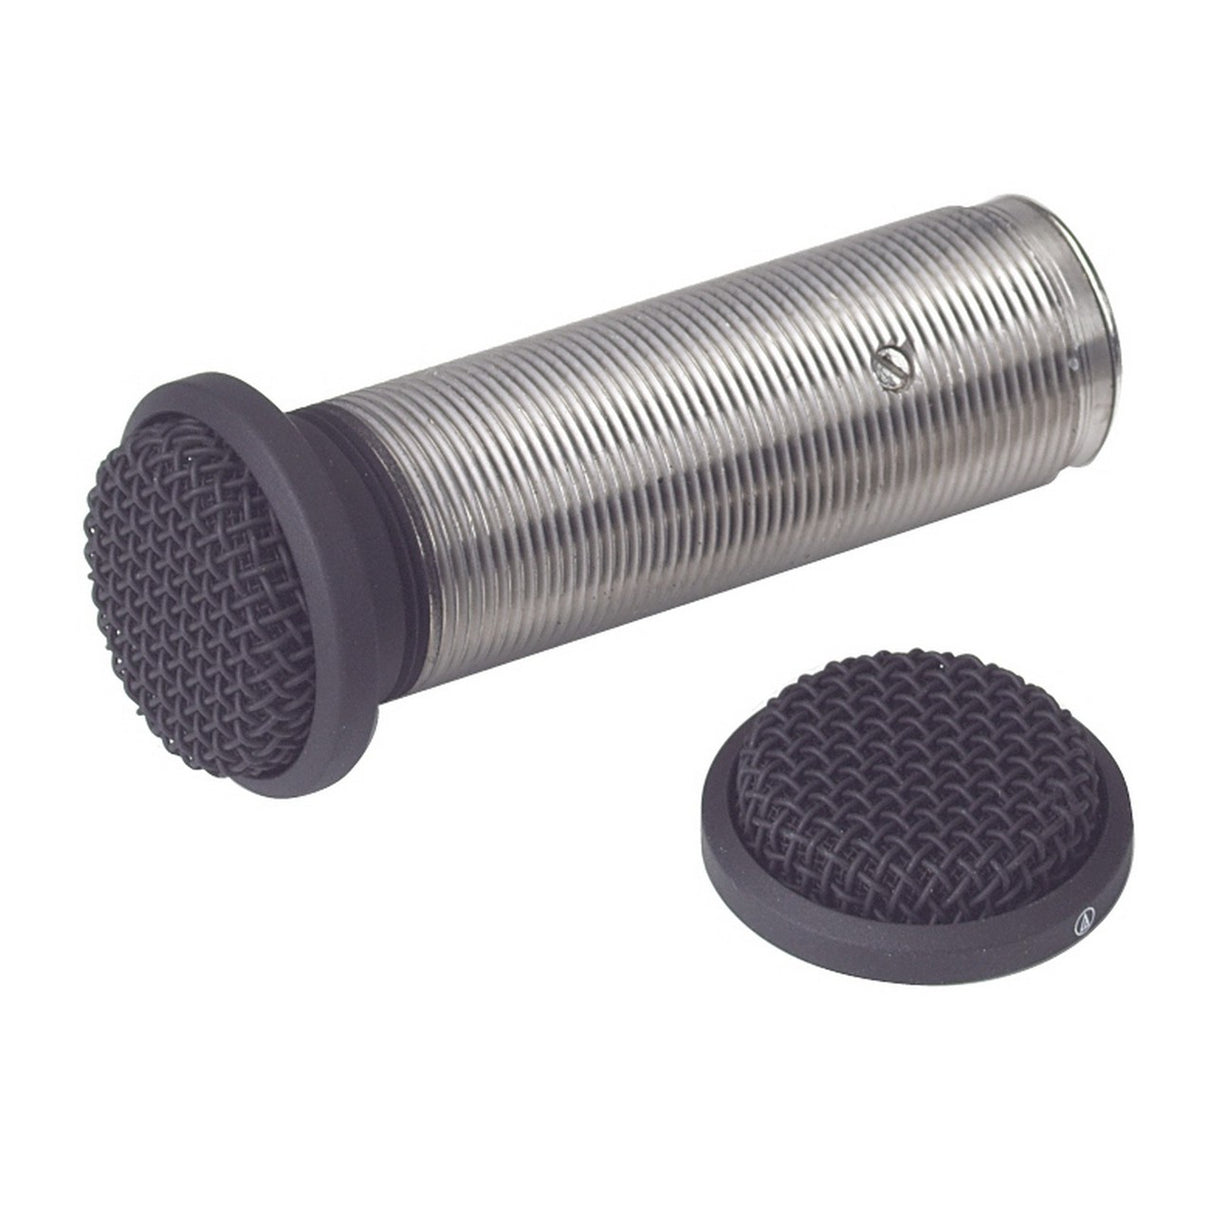 ClearOne Button Microphone | Uni-Directional Table Panel Permanent Installation Conferencing Microphone